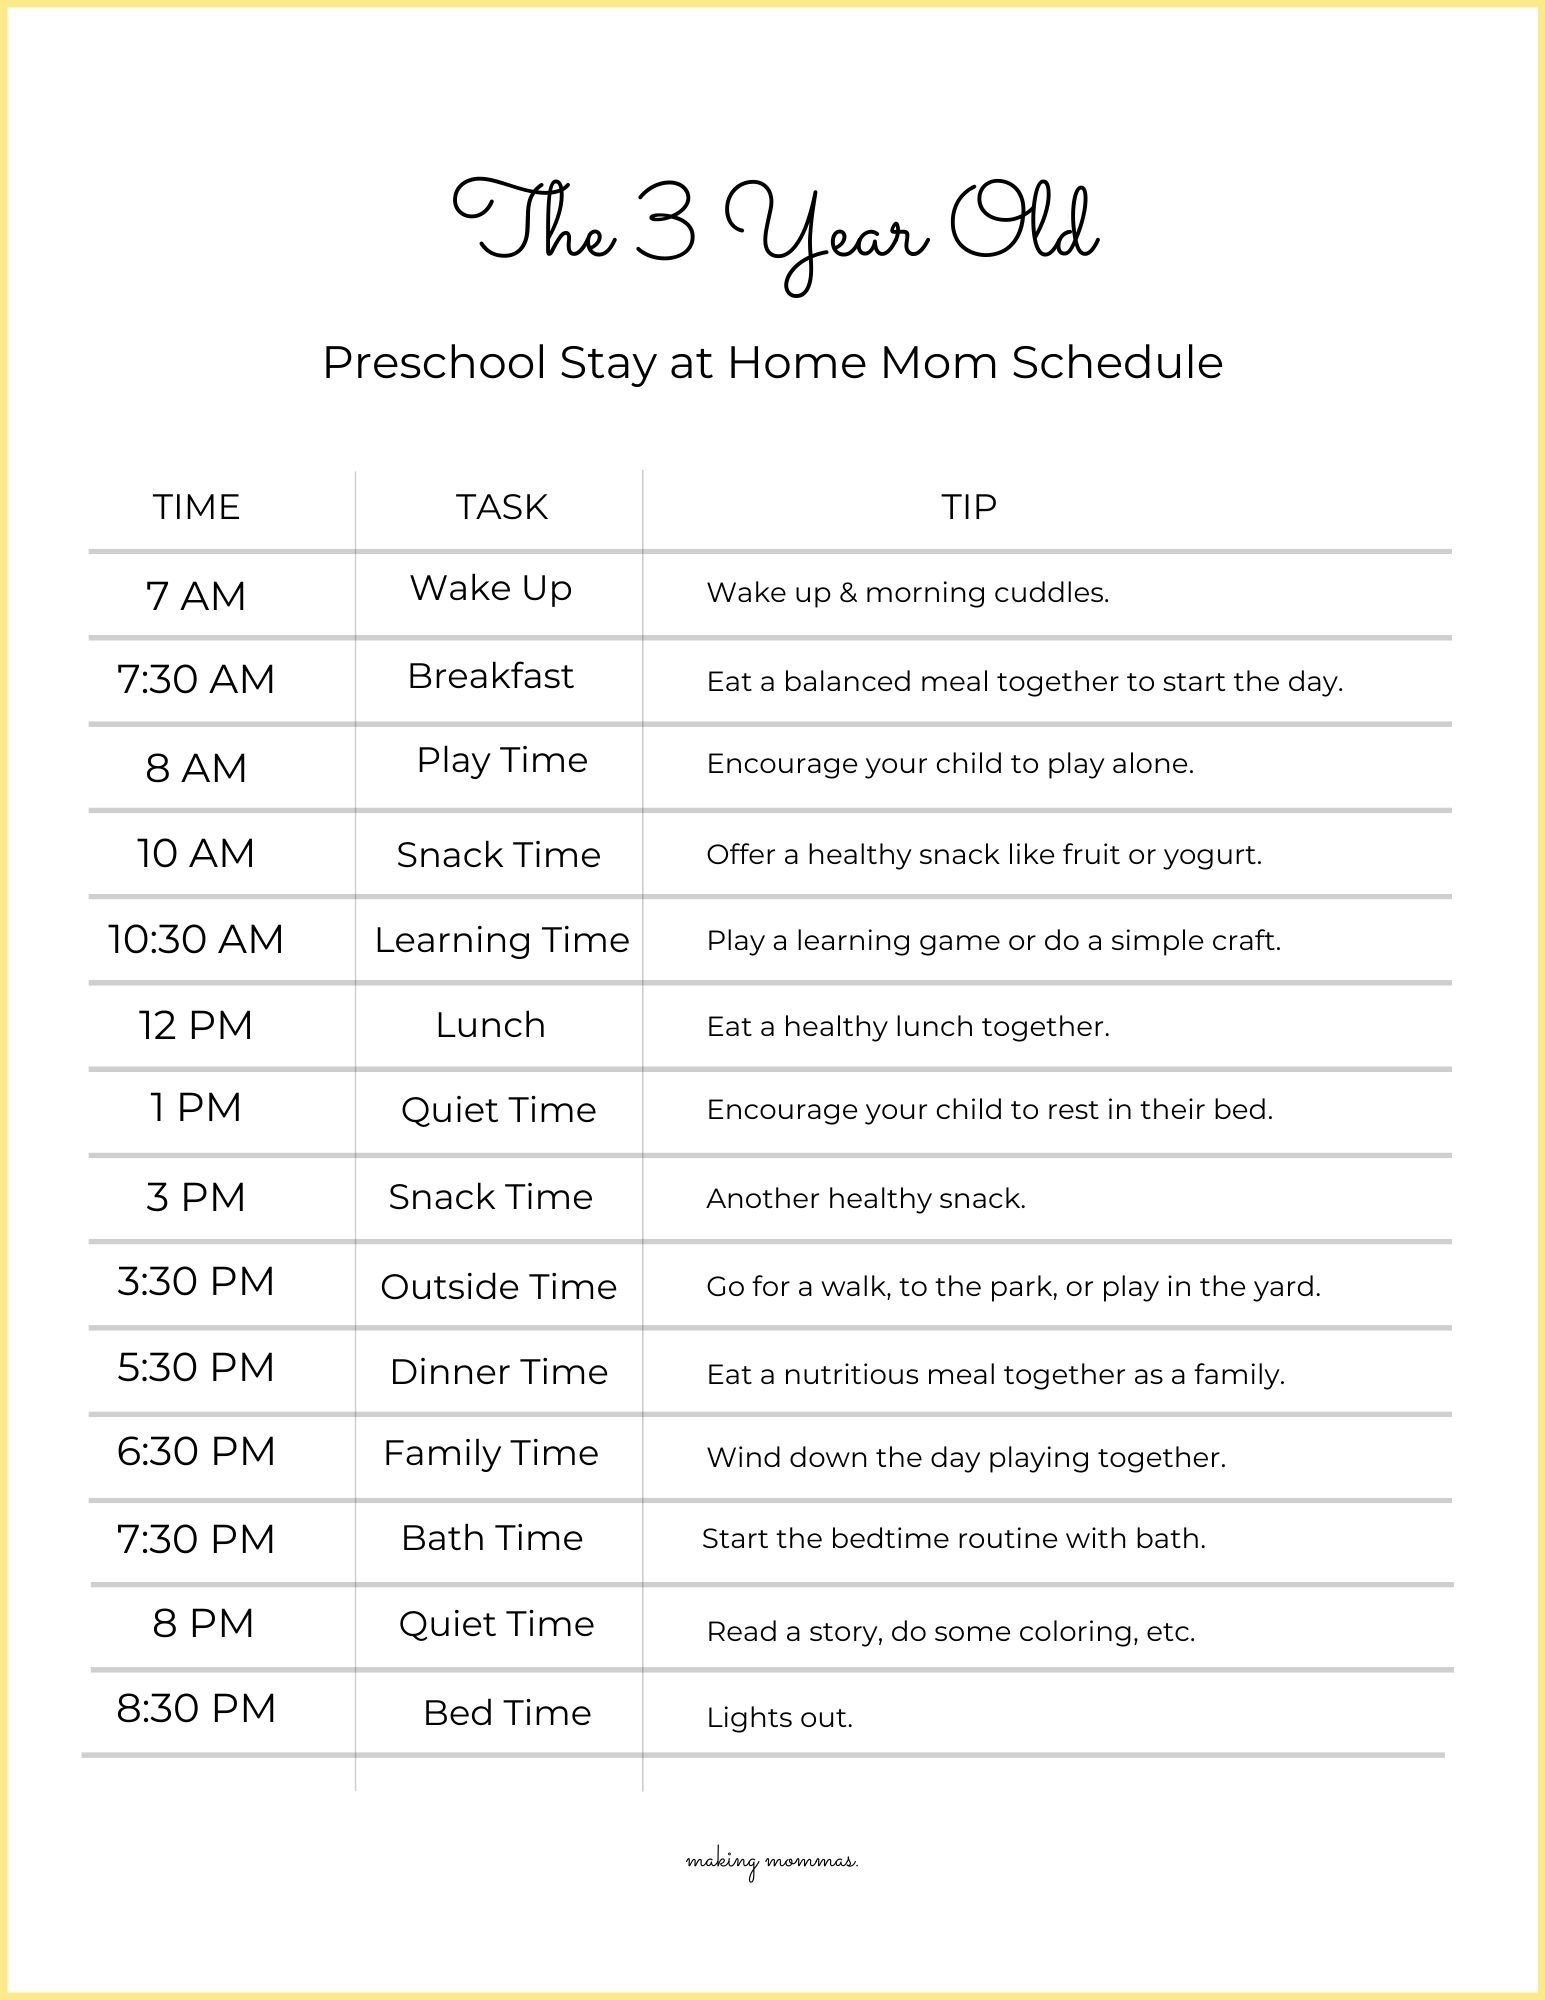 pin image of a sample 3 year old stay at home mom schedule